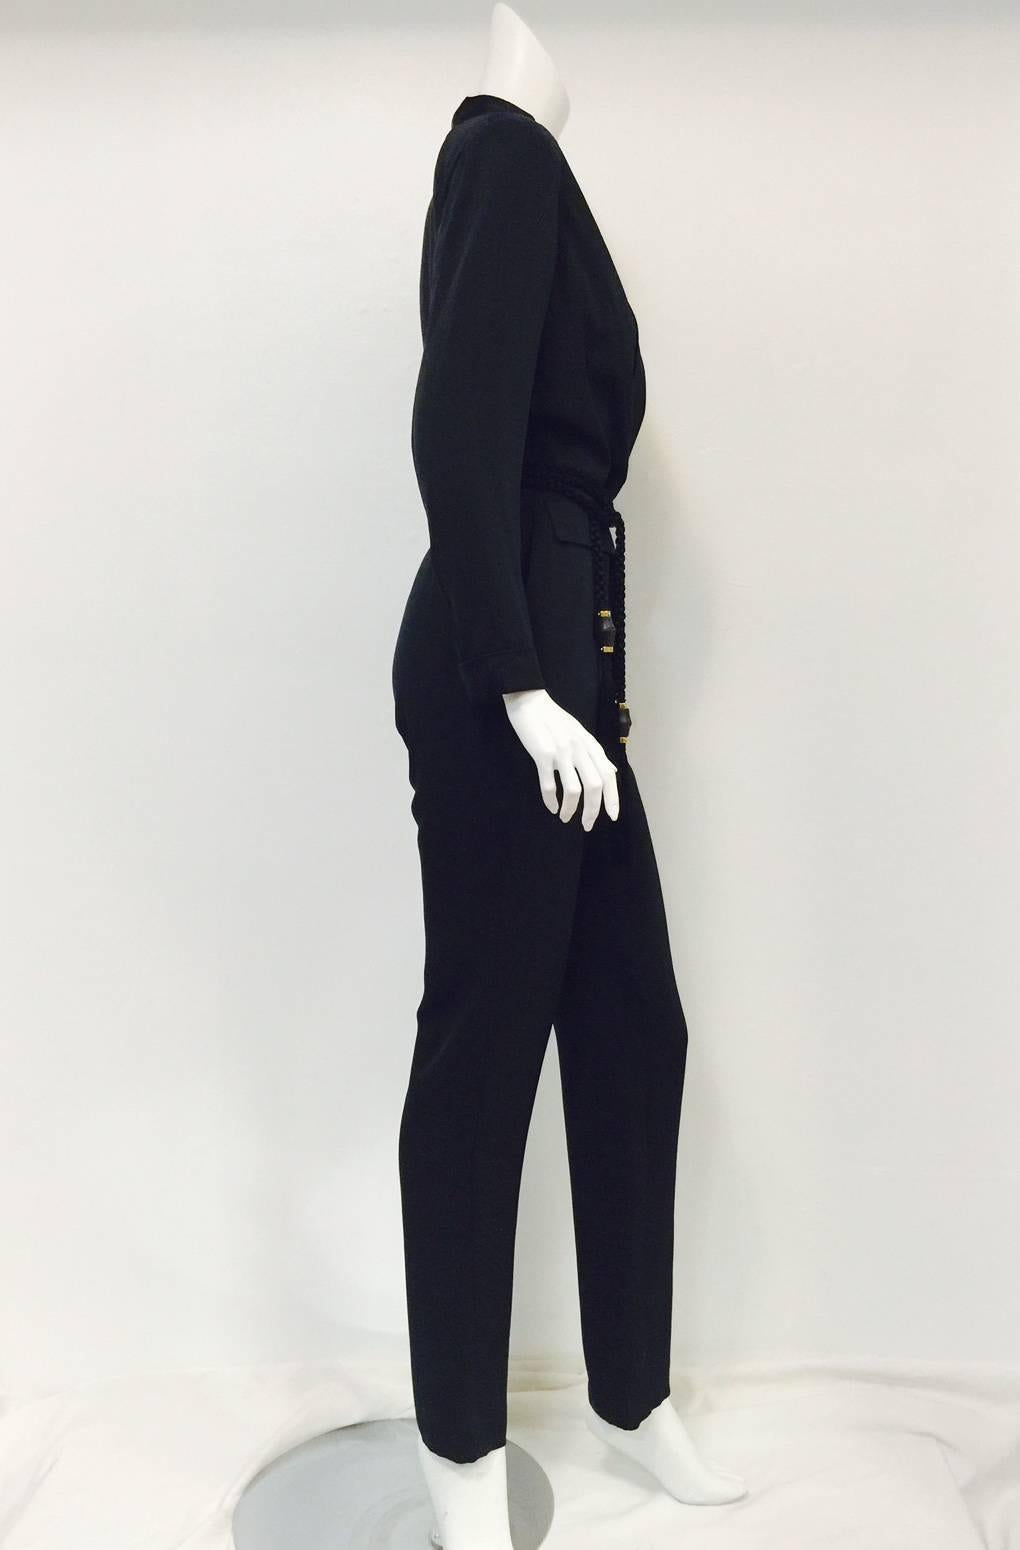 Black Silk Tuxedo Jumpsuit  is a must for any connoisseur of the Gucci that Tom Ford built!  Features ultra-luxurious silk with satin tuxedo collar, breast pocket and cuffs!  Two flap pockets complete the look.  The piece de resistance?  A